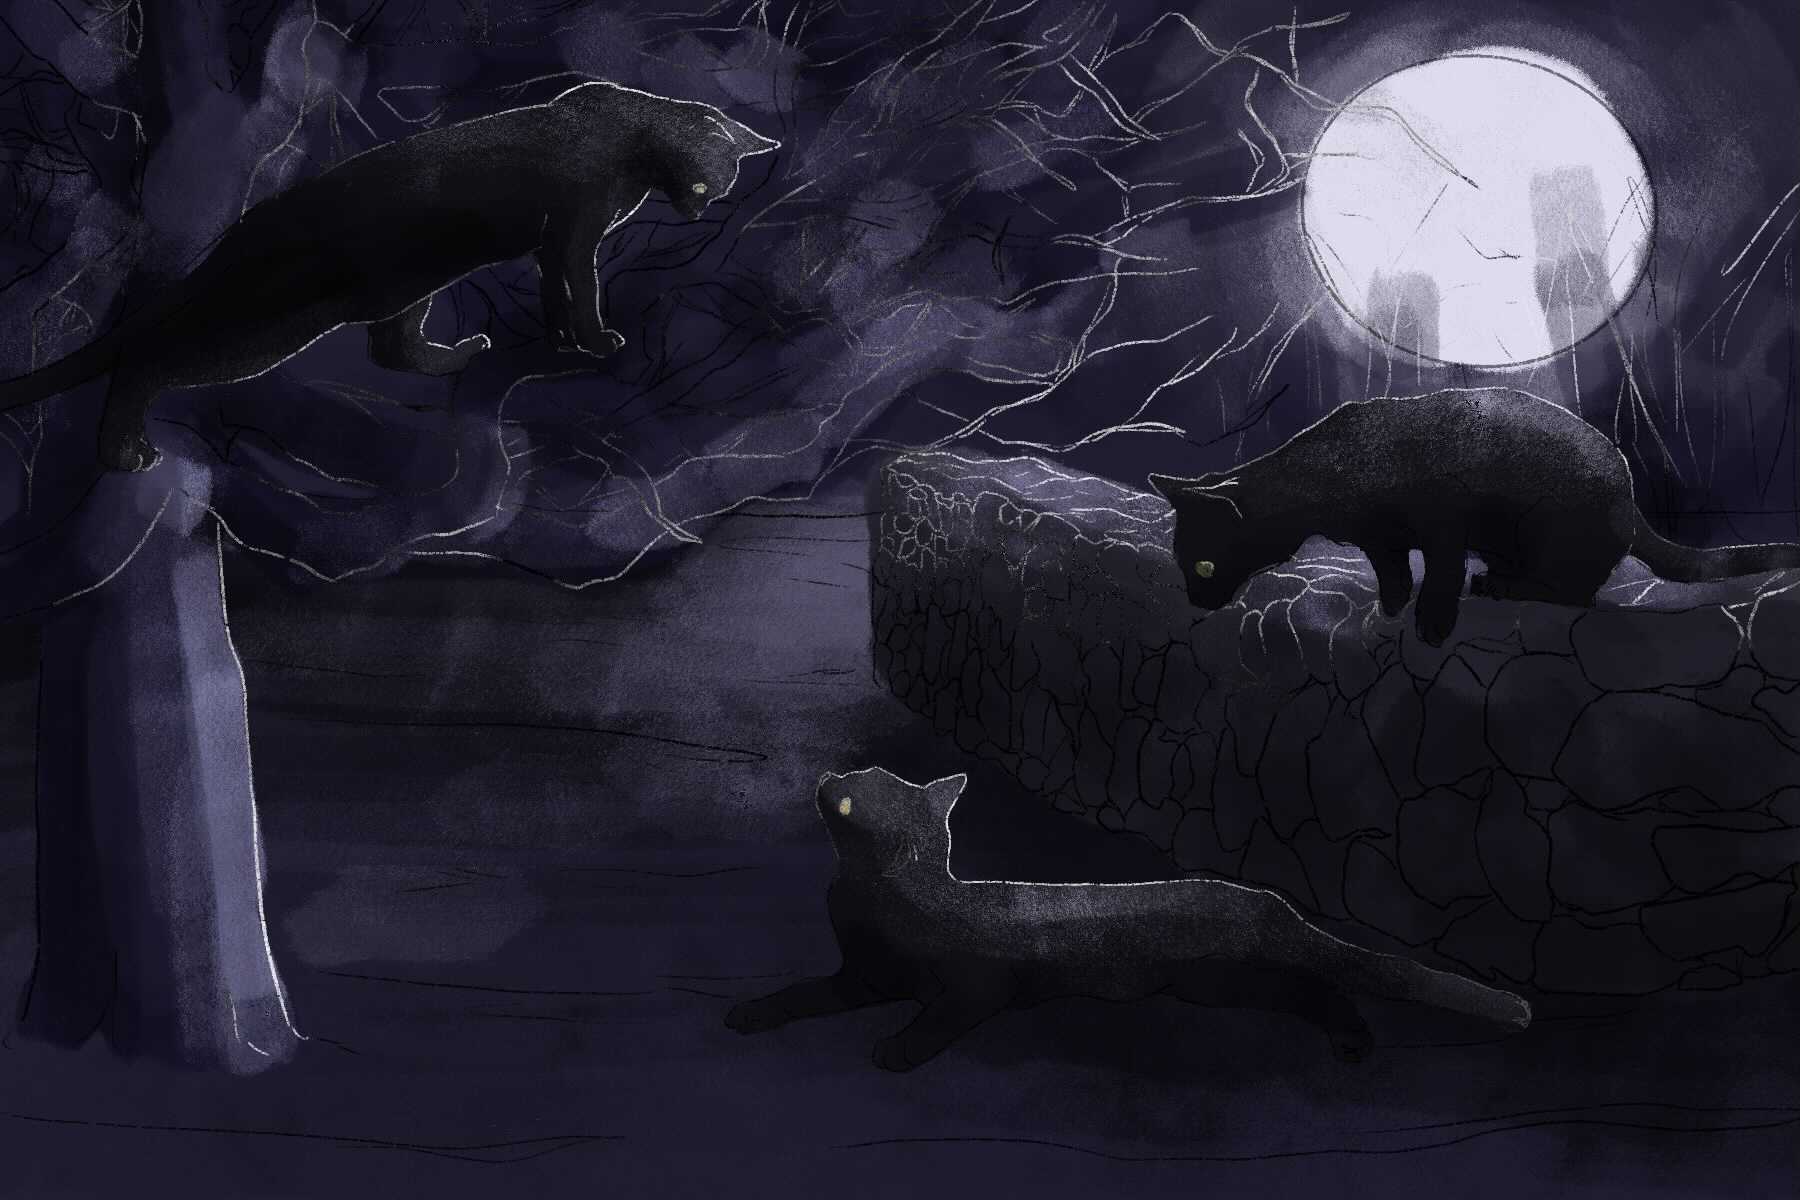 An illustration of three black cats in a yard at night in front of a bright moon.